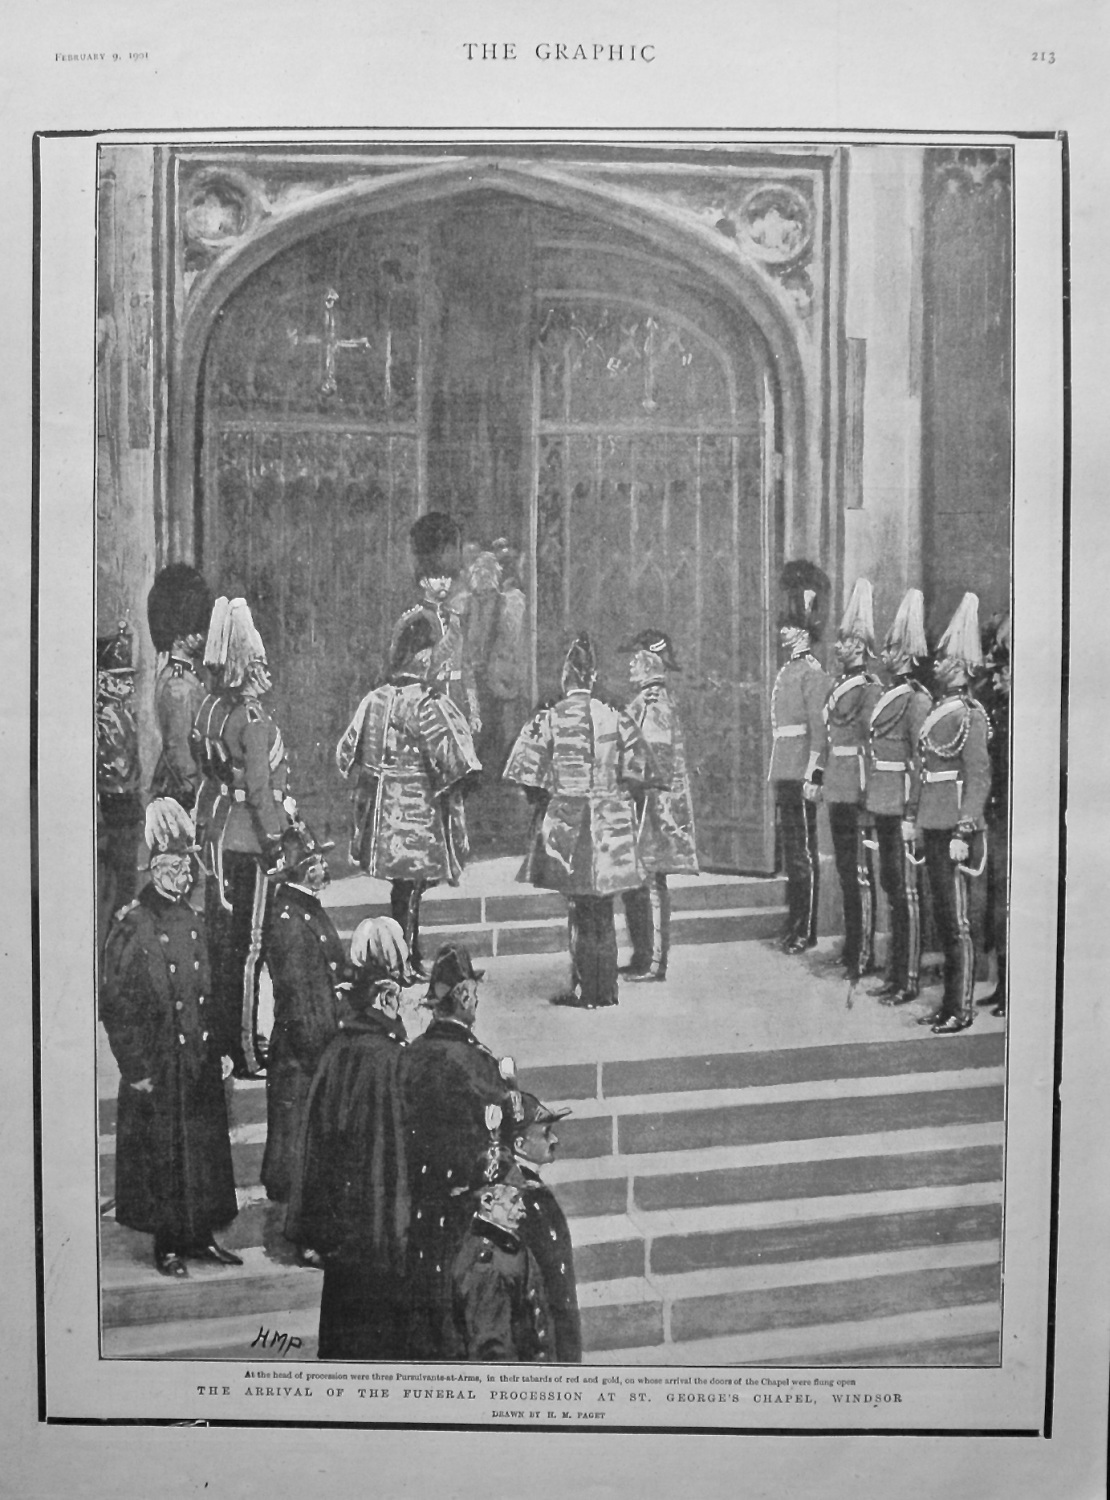 The Arrival of the Funeral Procession at St. George's Chapel, Windsor. (Fun